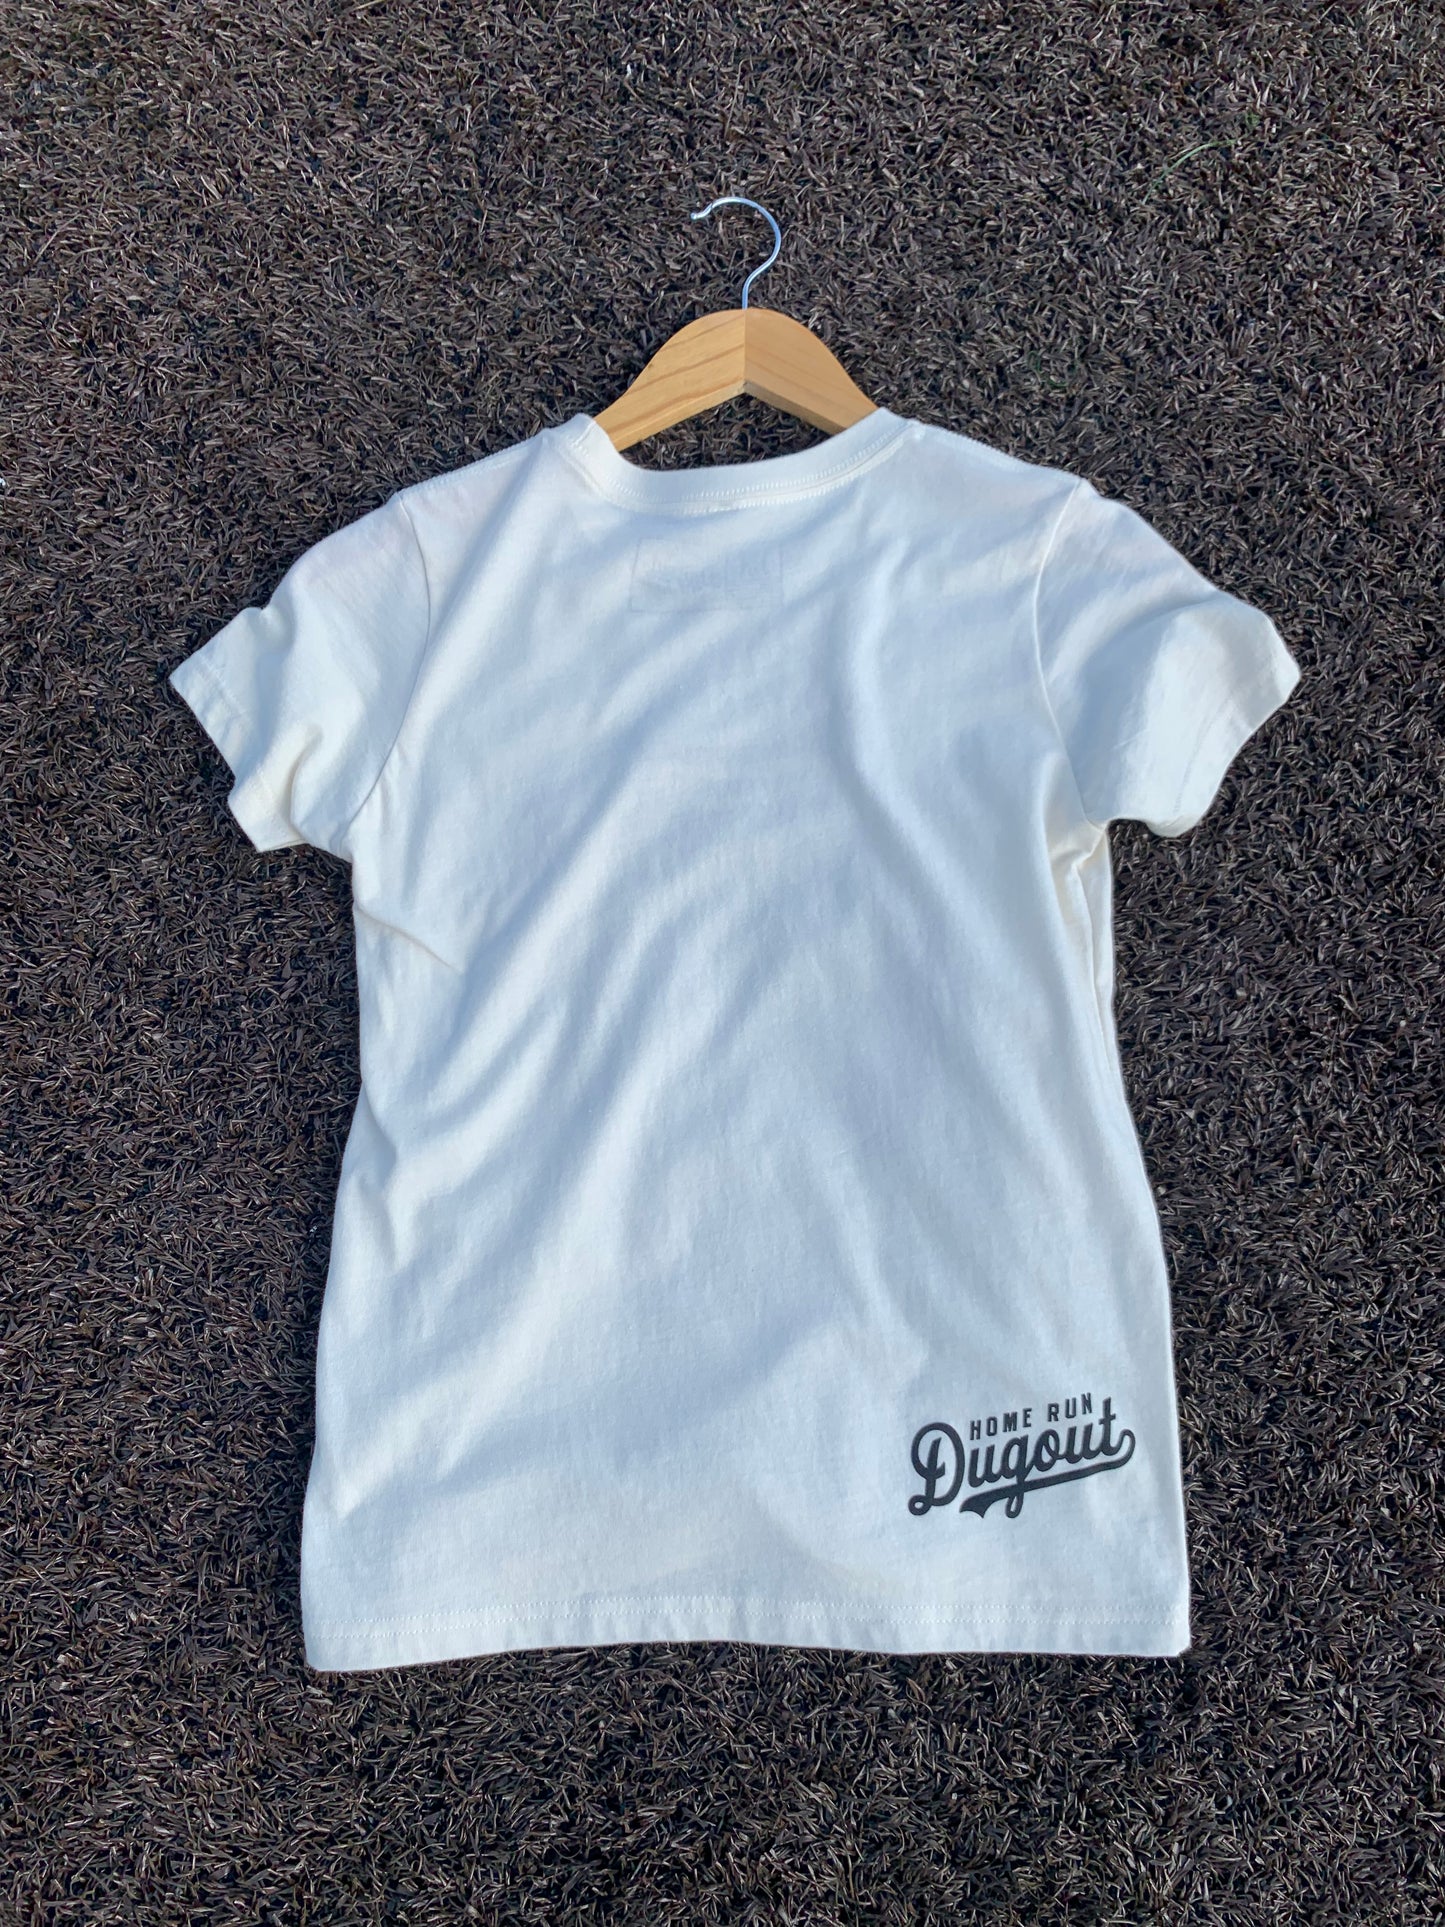 "Dog Friendly" Youth/Toddler Tee